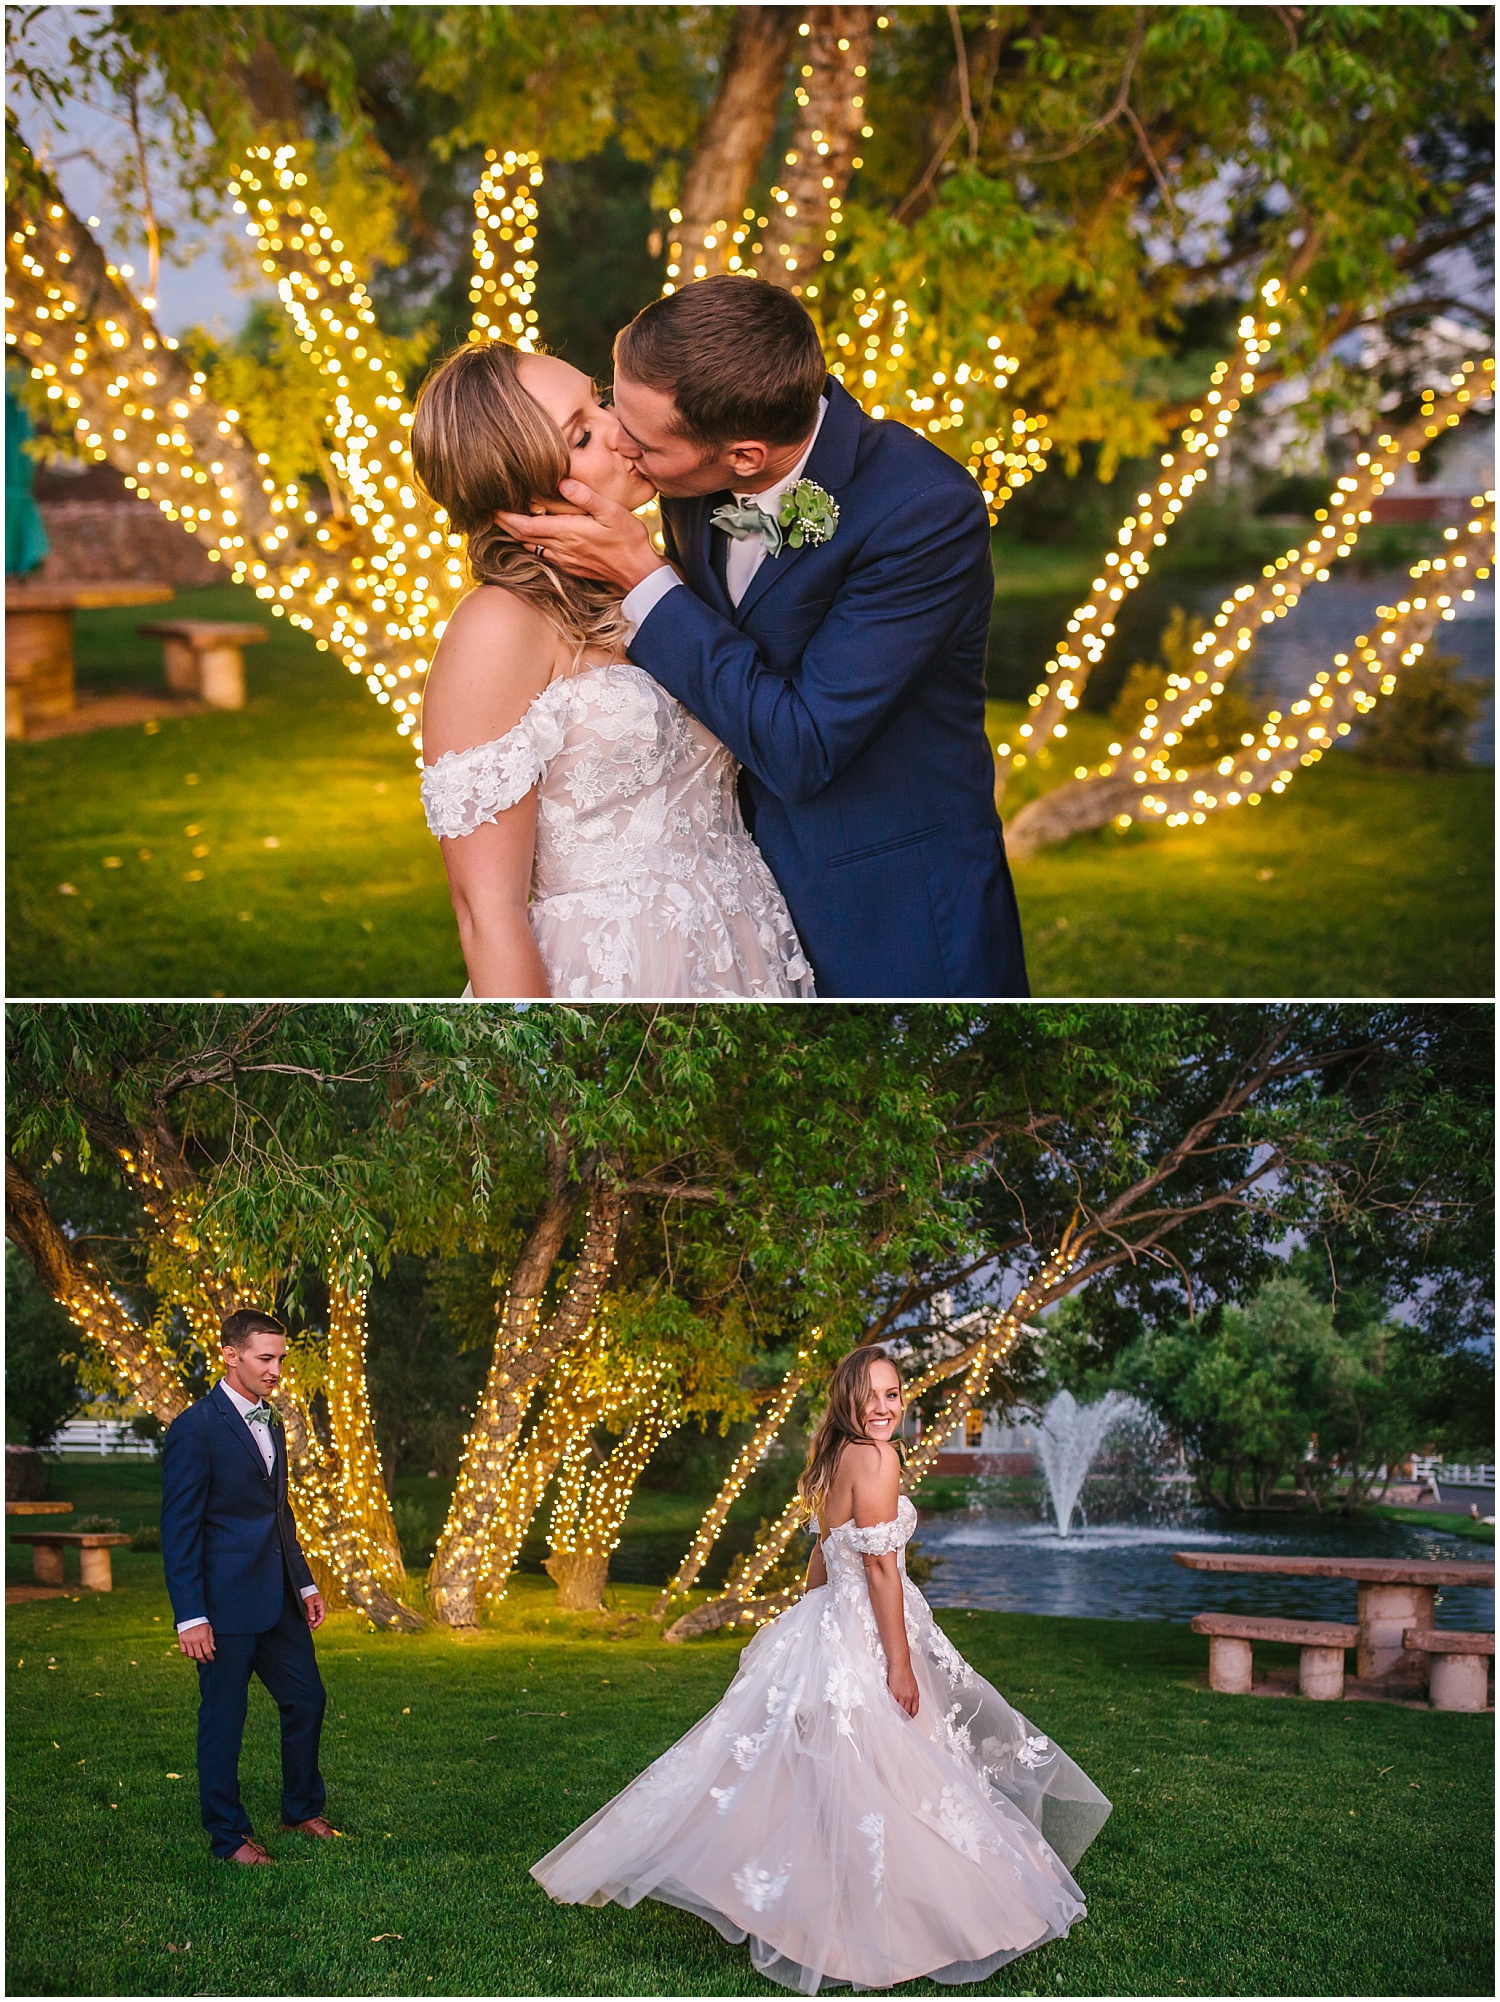 Bride and groom under the twinkle lights at night at Crooked Willow Farms wedding